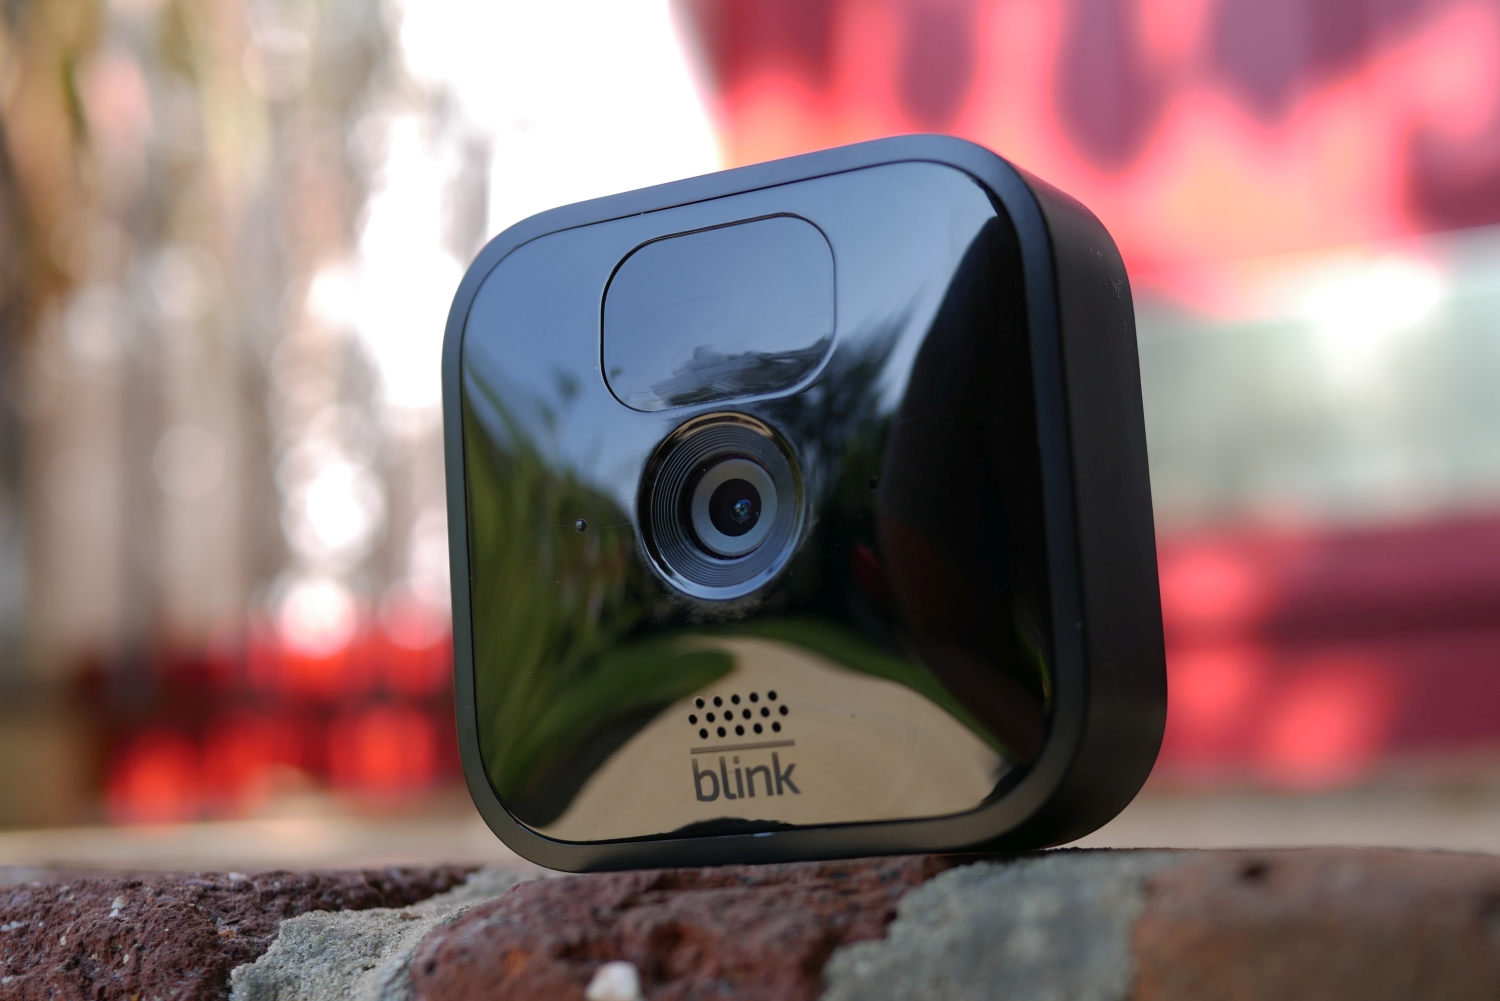 Purchasing a Blink Subscription Plan through  — Blink Support